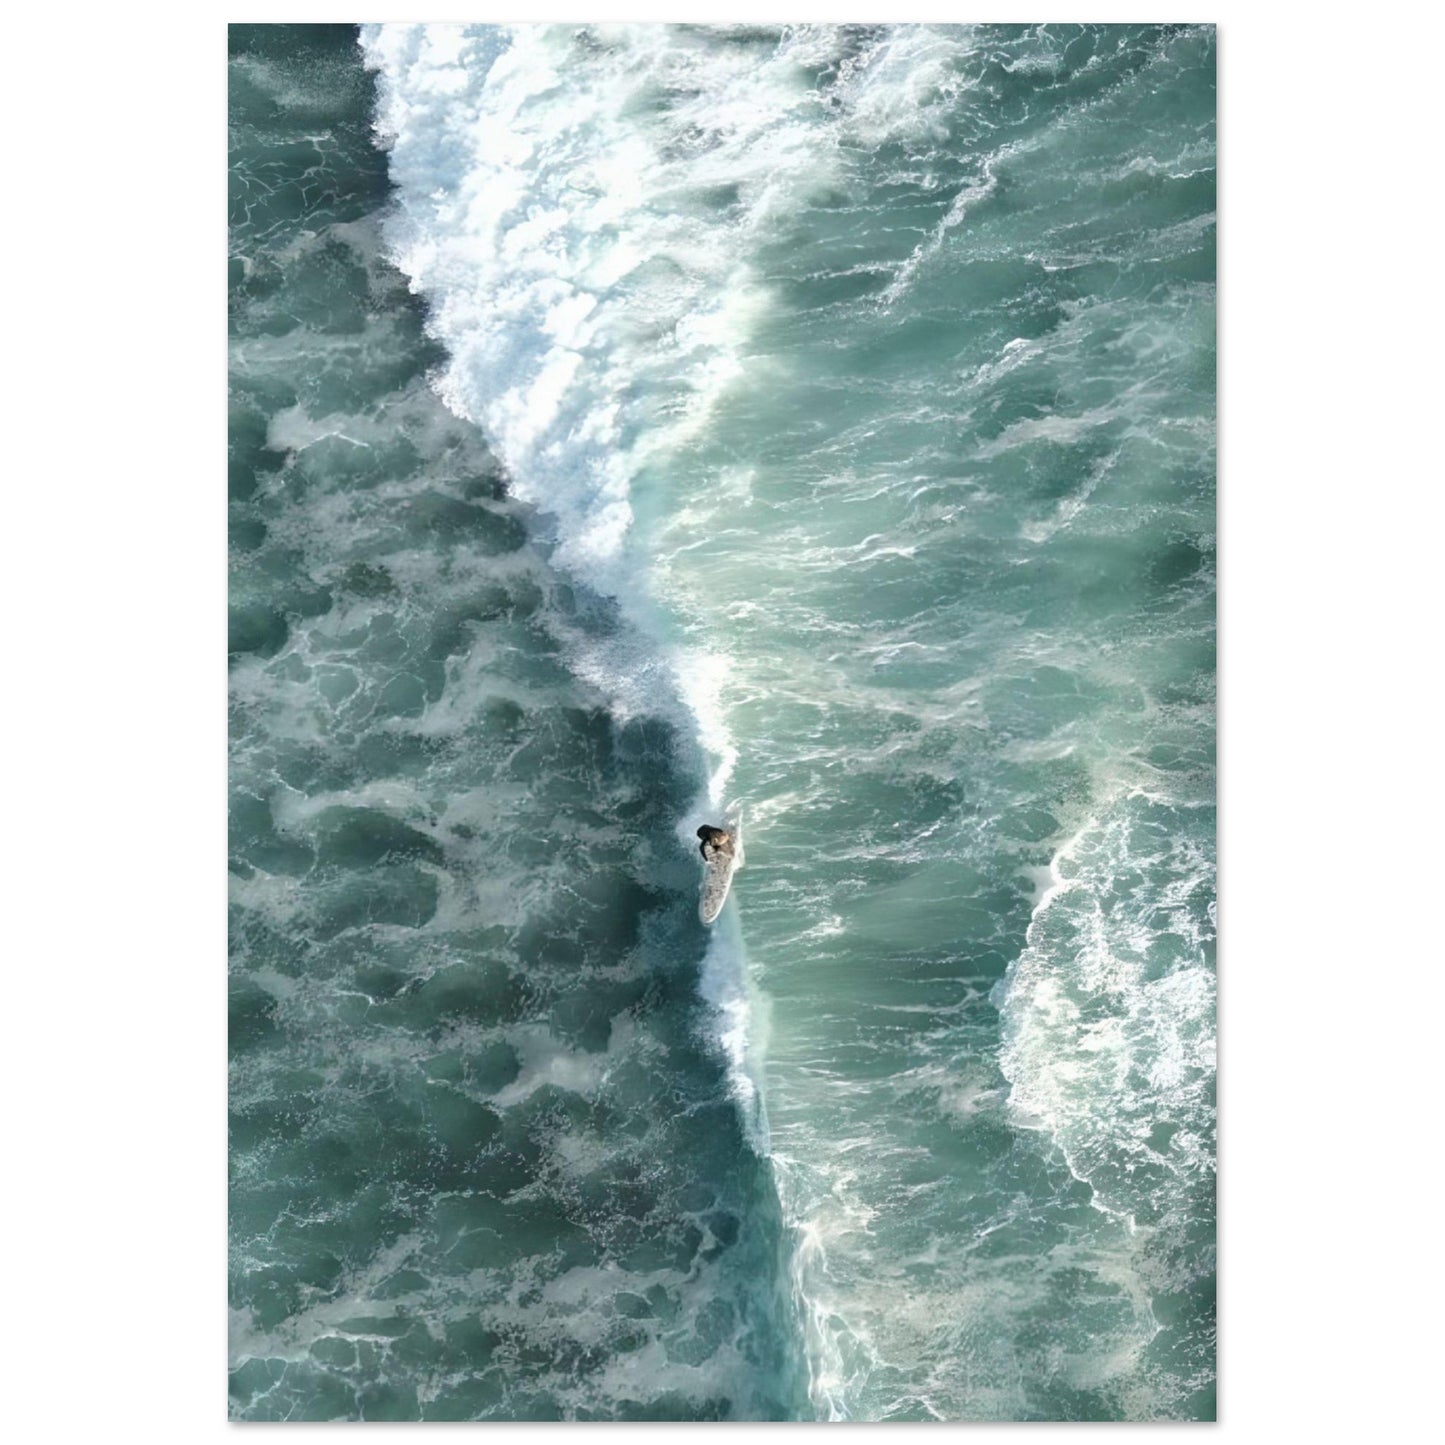 Surf Over the Waves - Poster